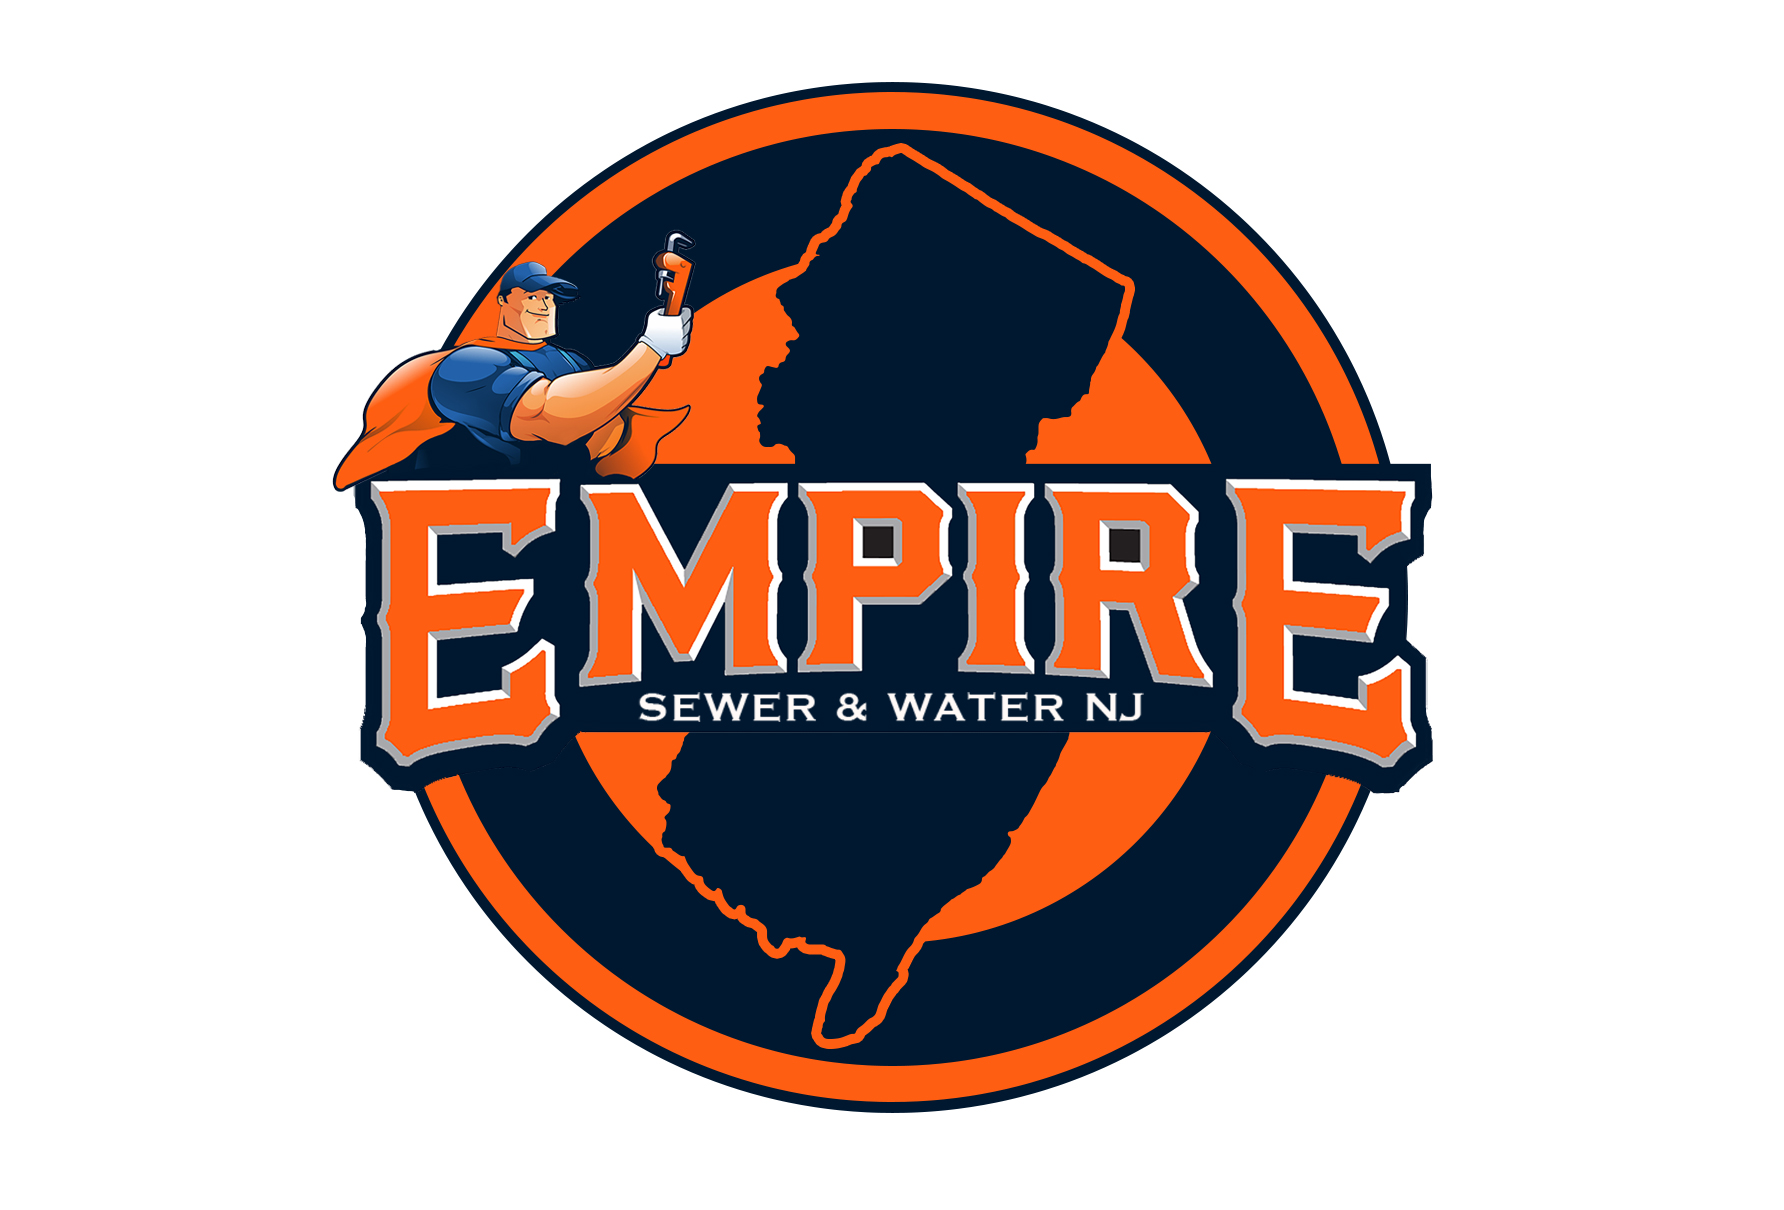 Empire Sewer & Water NJ